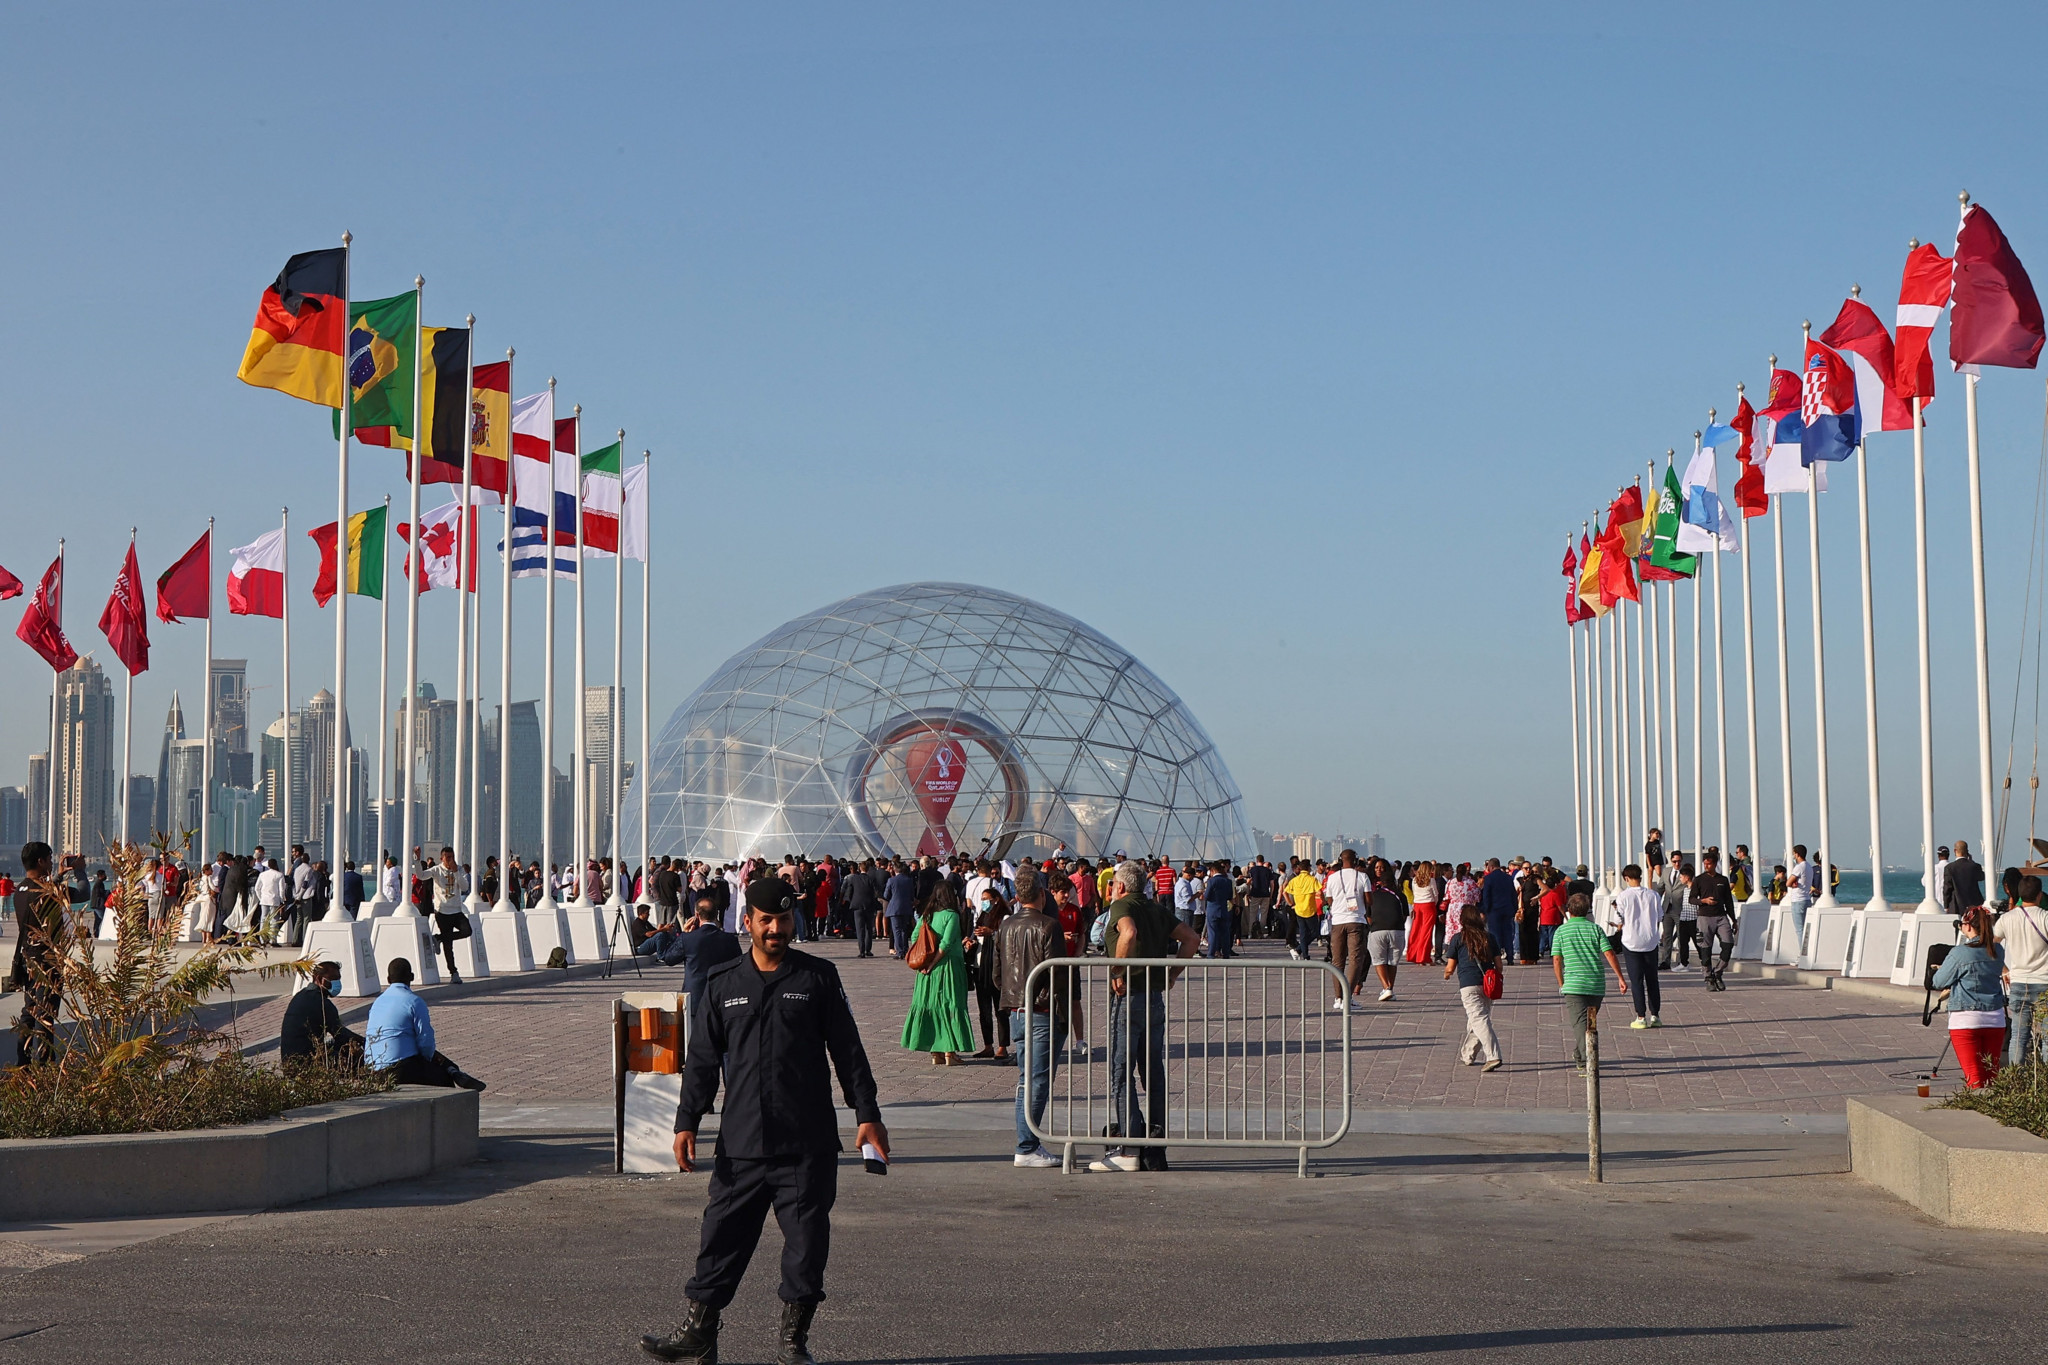 Qatar is preparing to hold the FIFA World Cup from November 21 to December 18 ©Getty Images